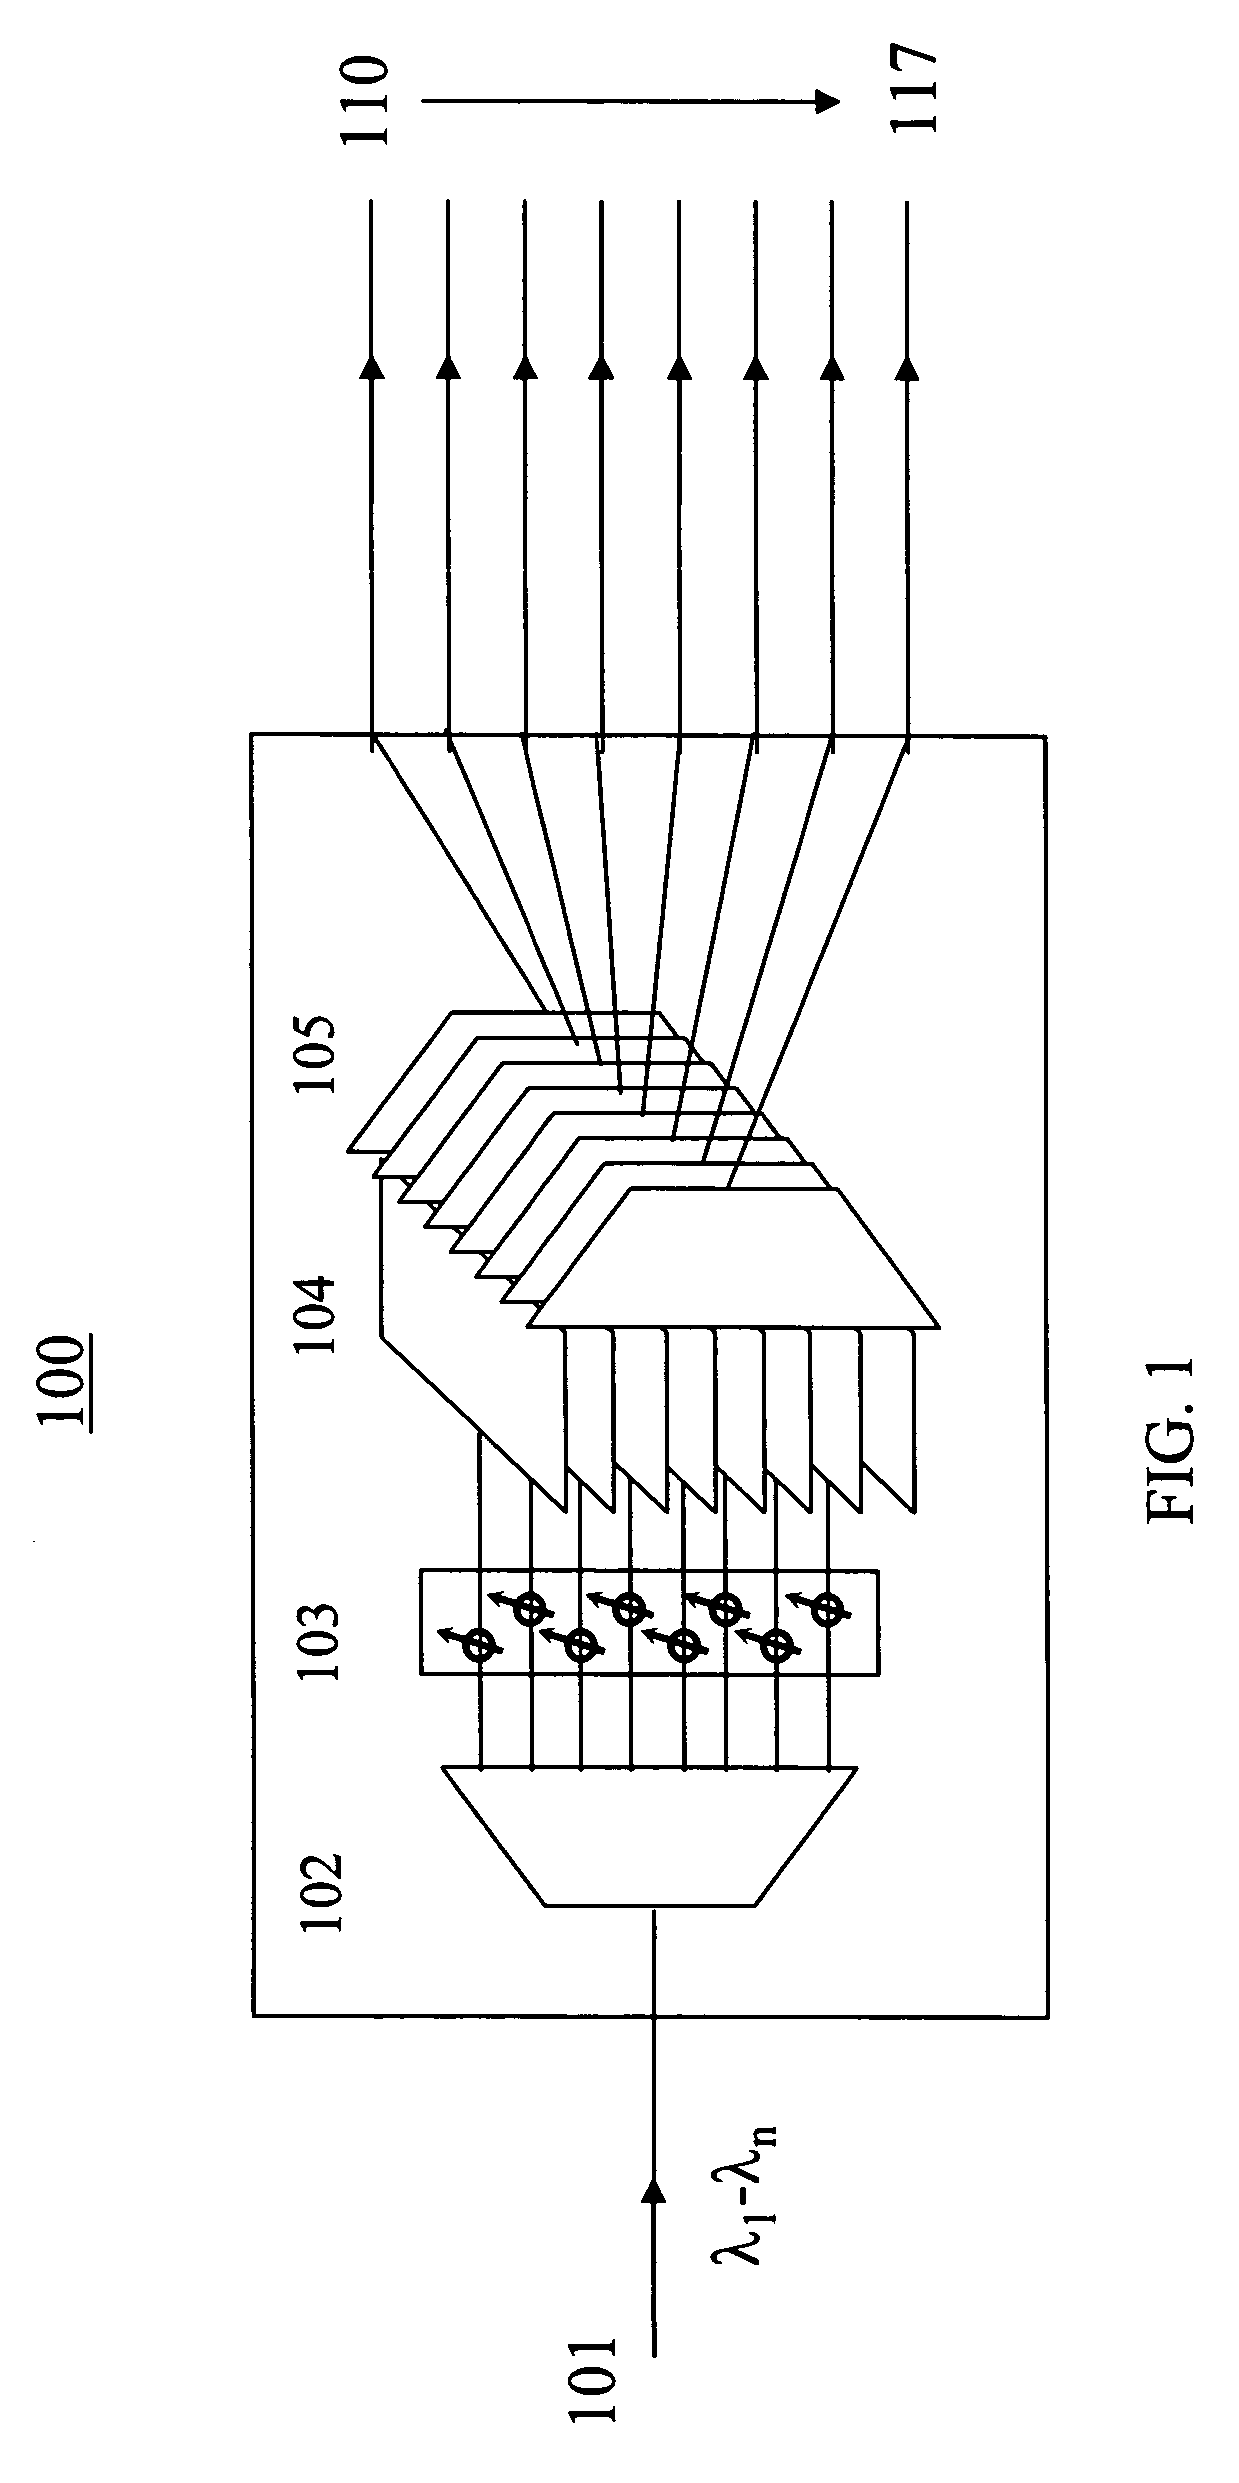 Tunable optical routing systems